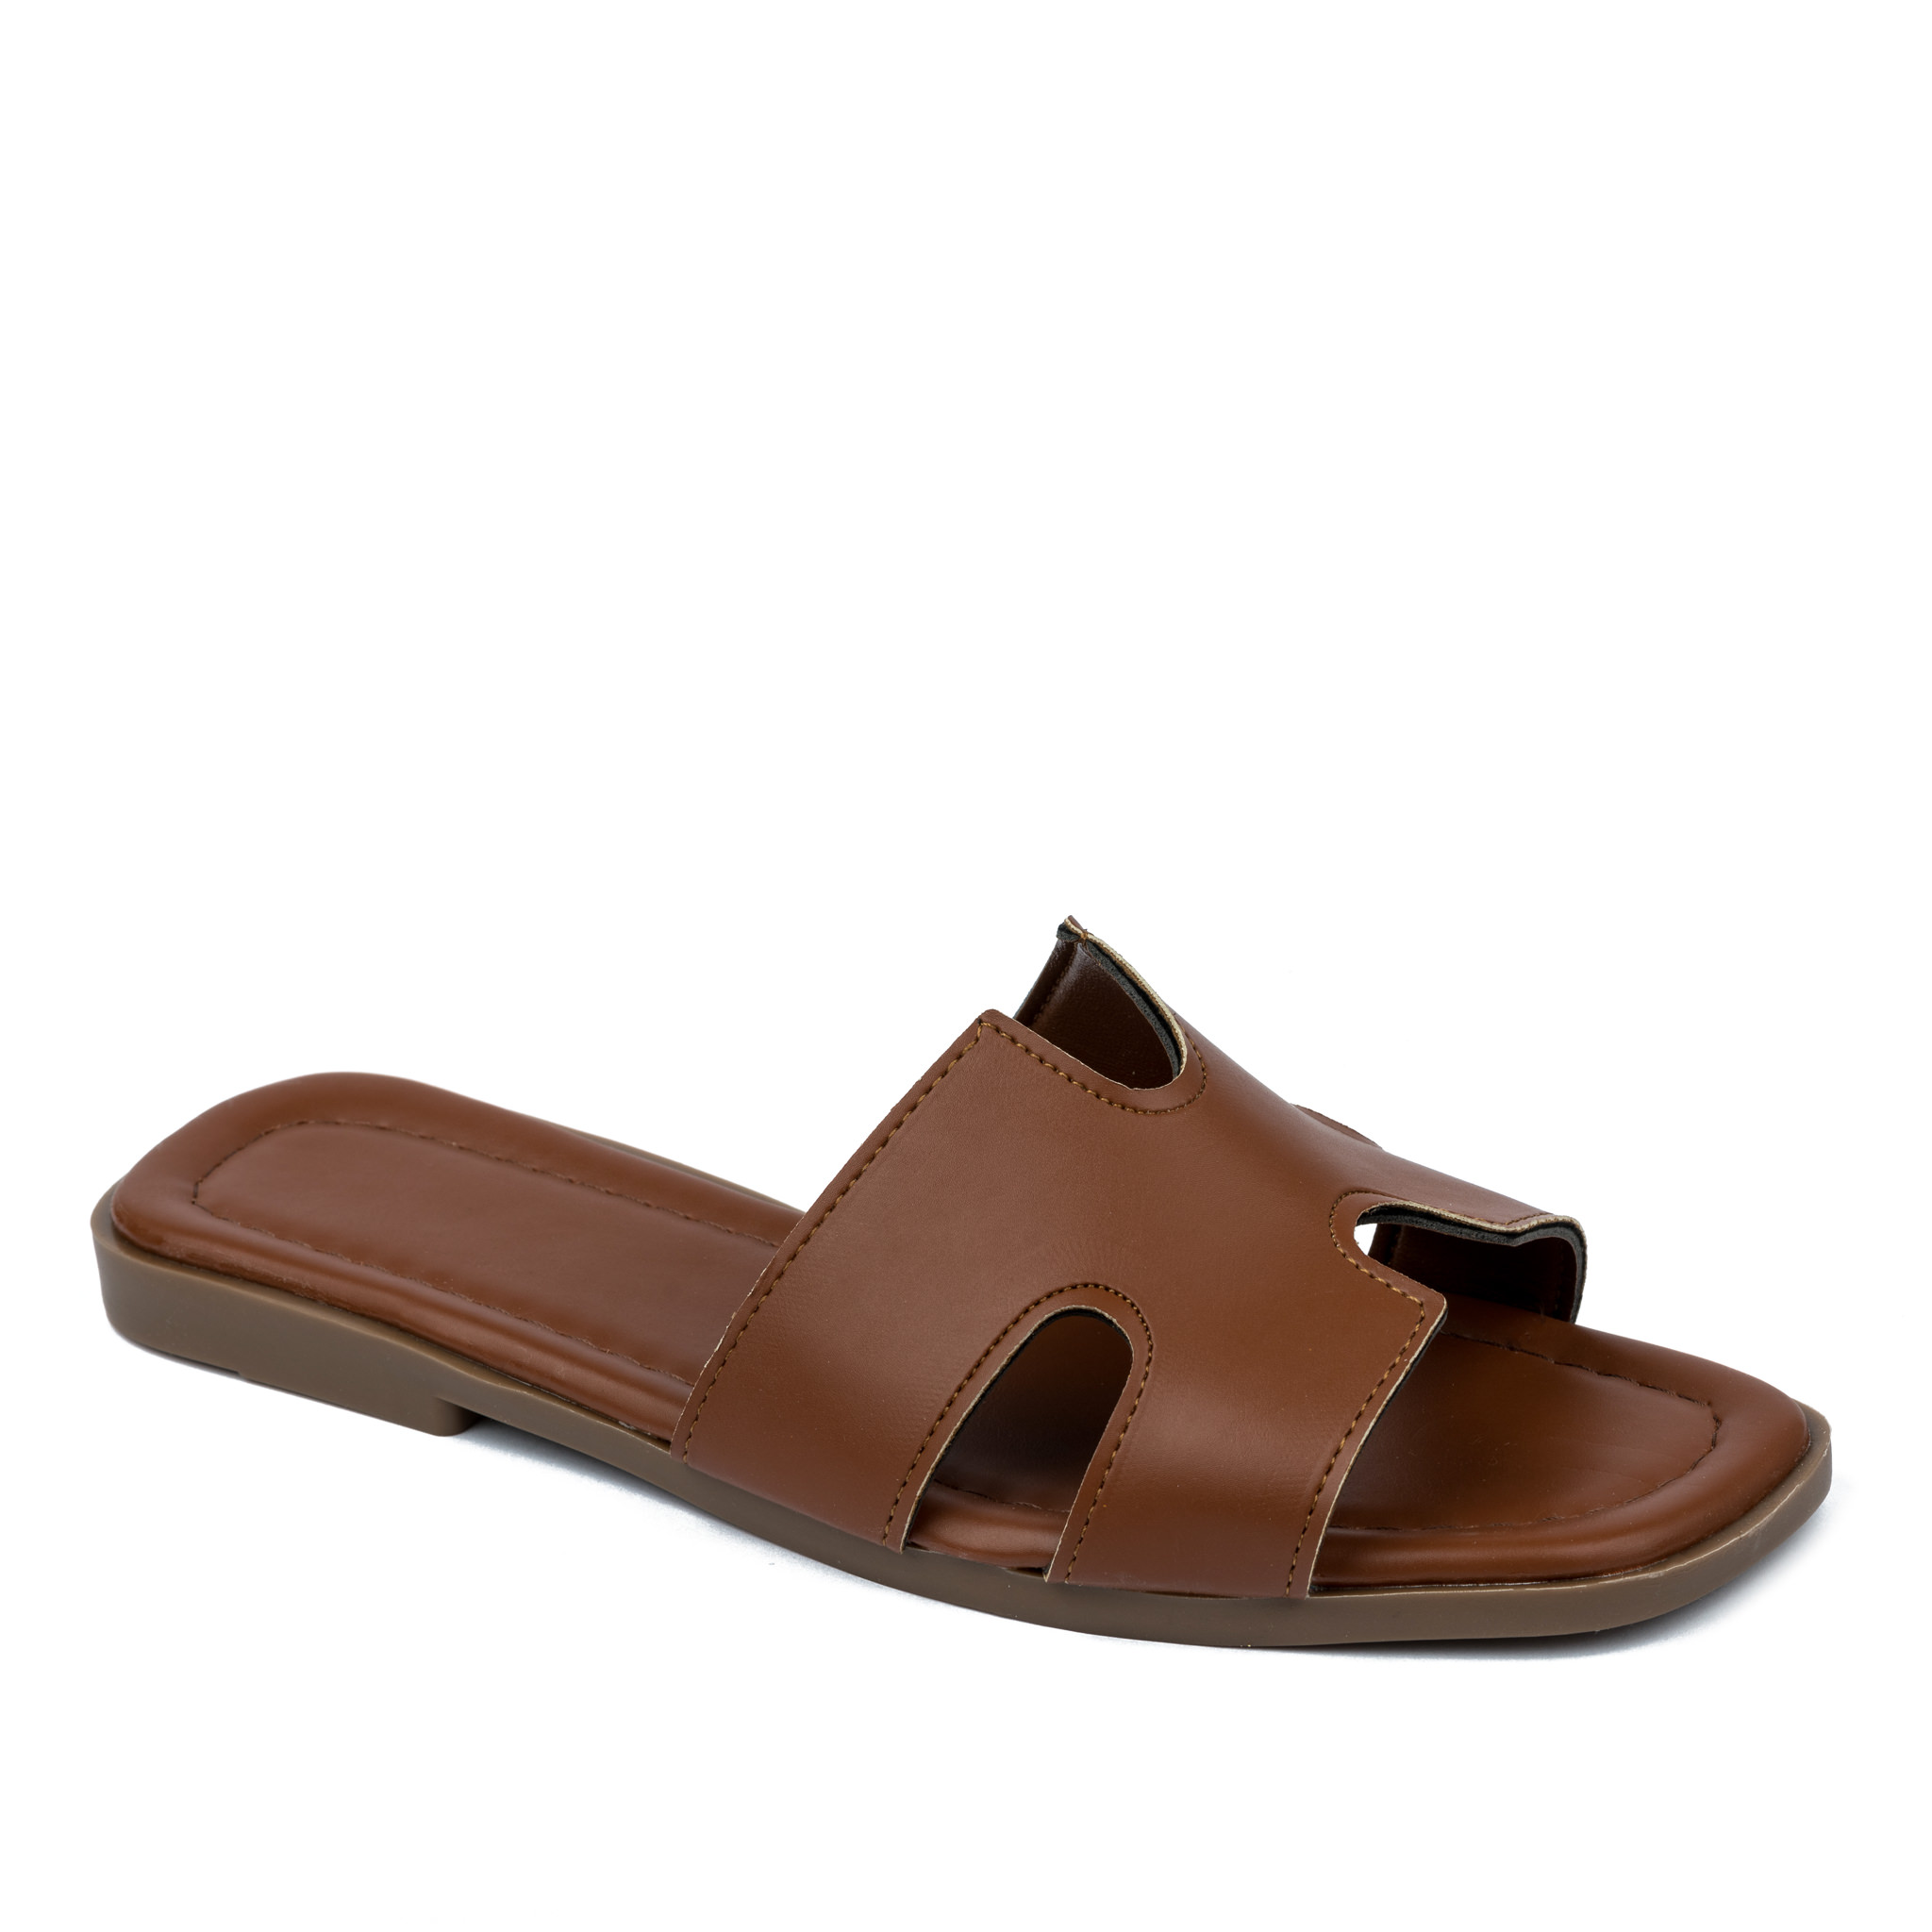 Women Slippers and Mules A549 - CAMEL